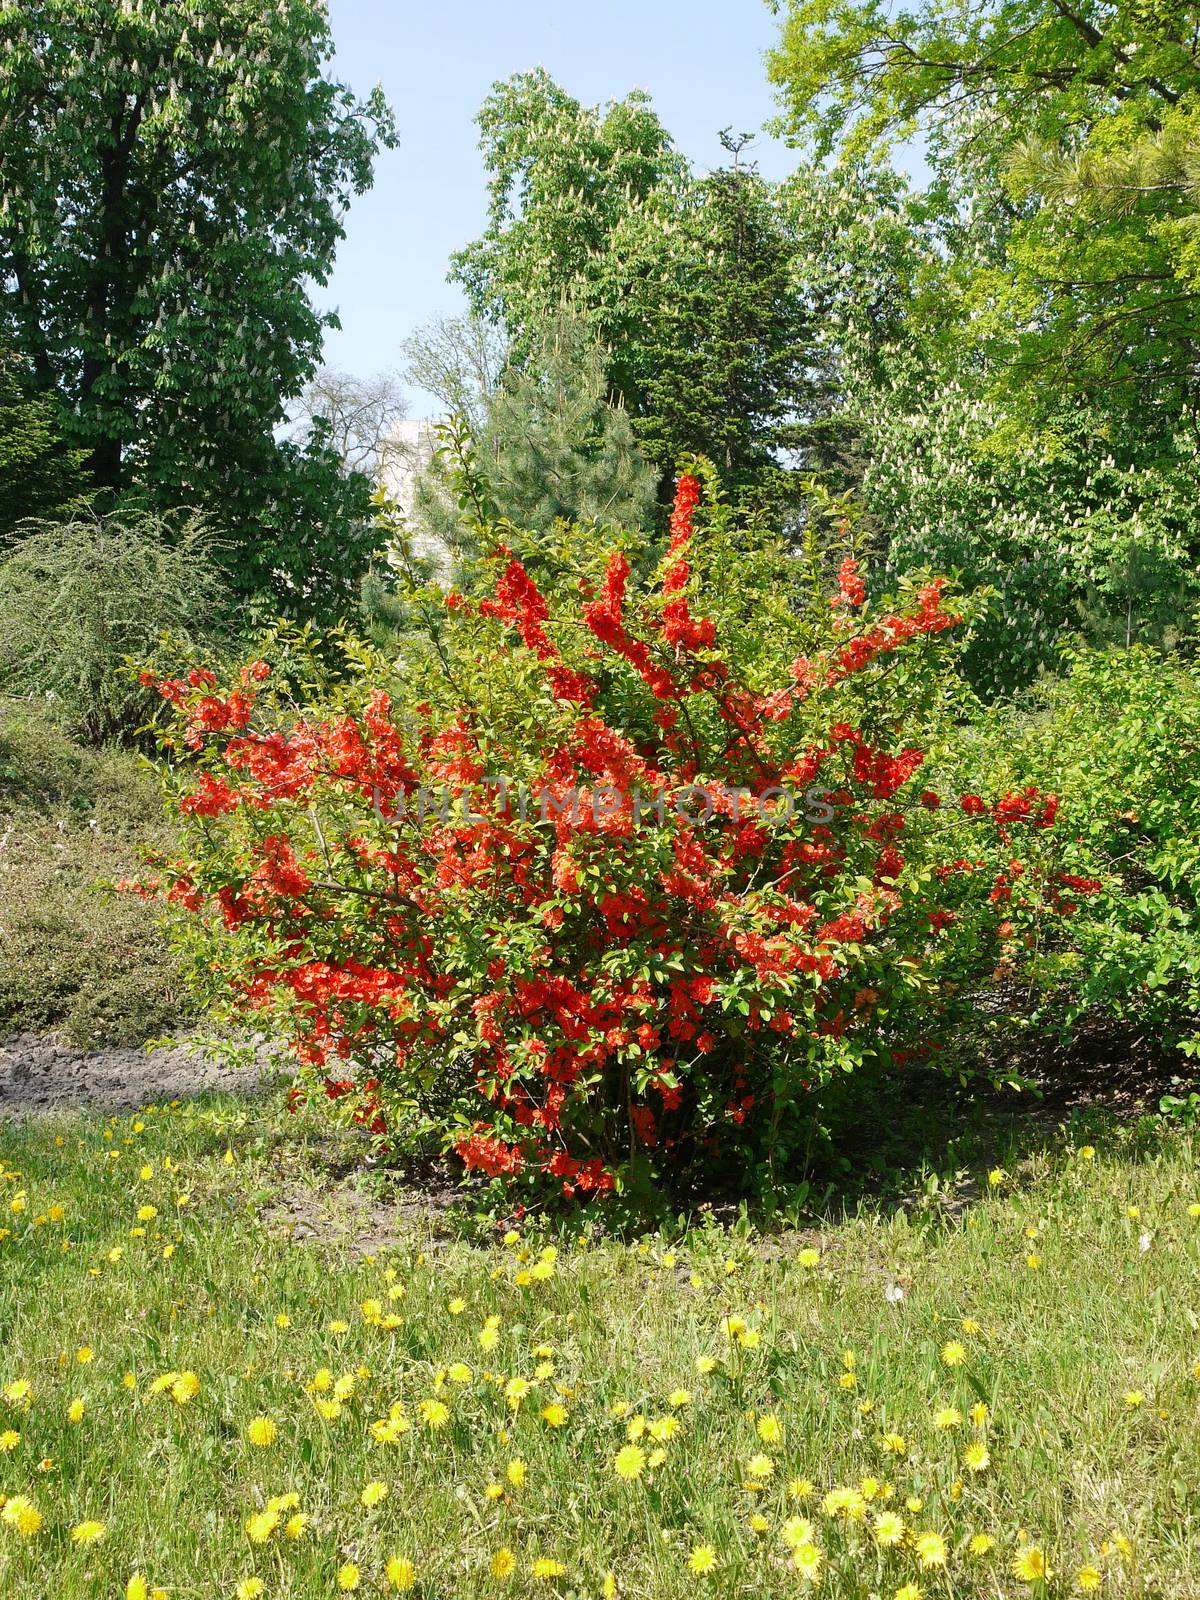 A large shrub with small red flowers and green leaves on long branches by Adamchuk